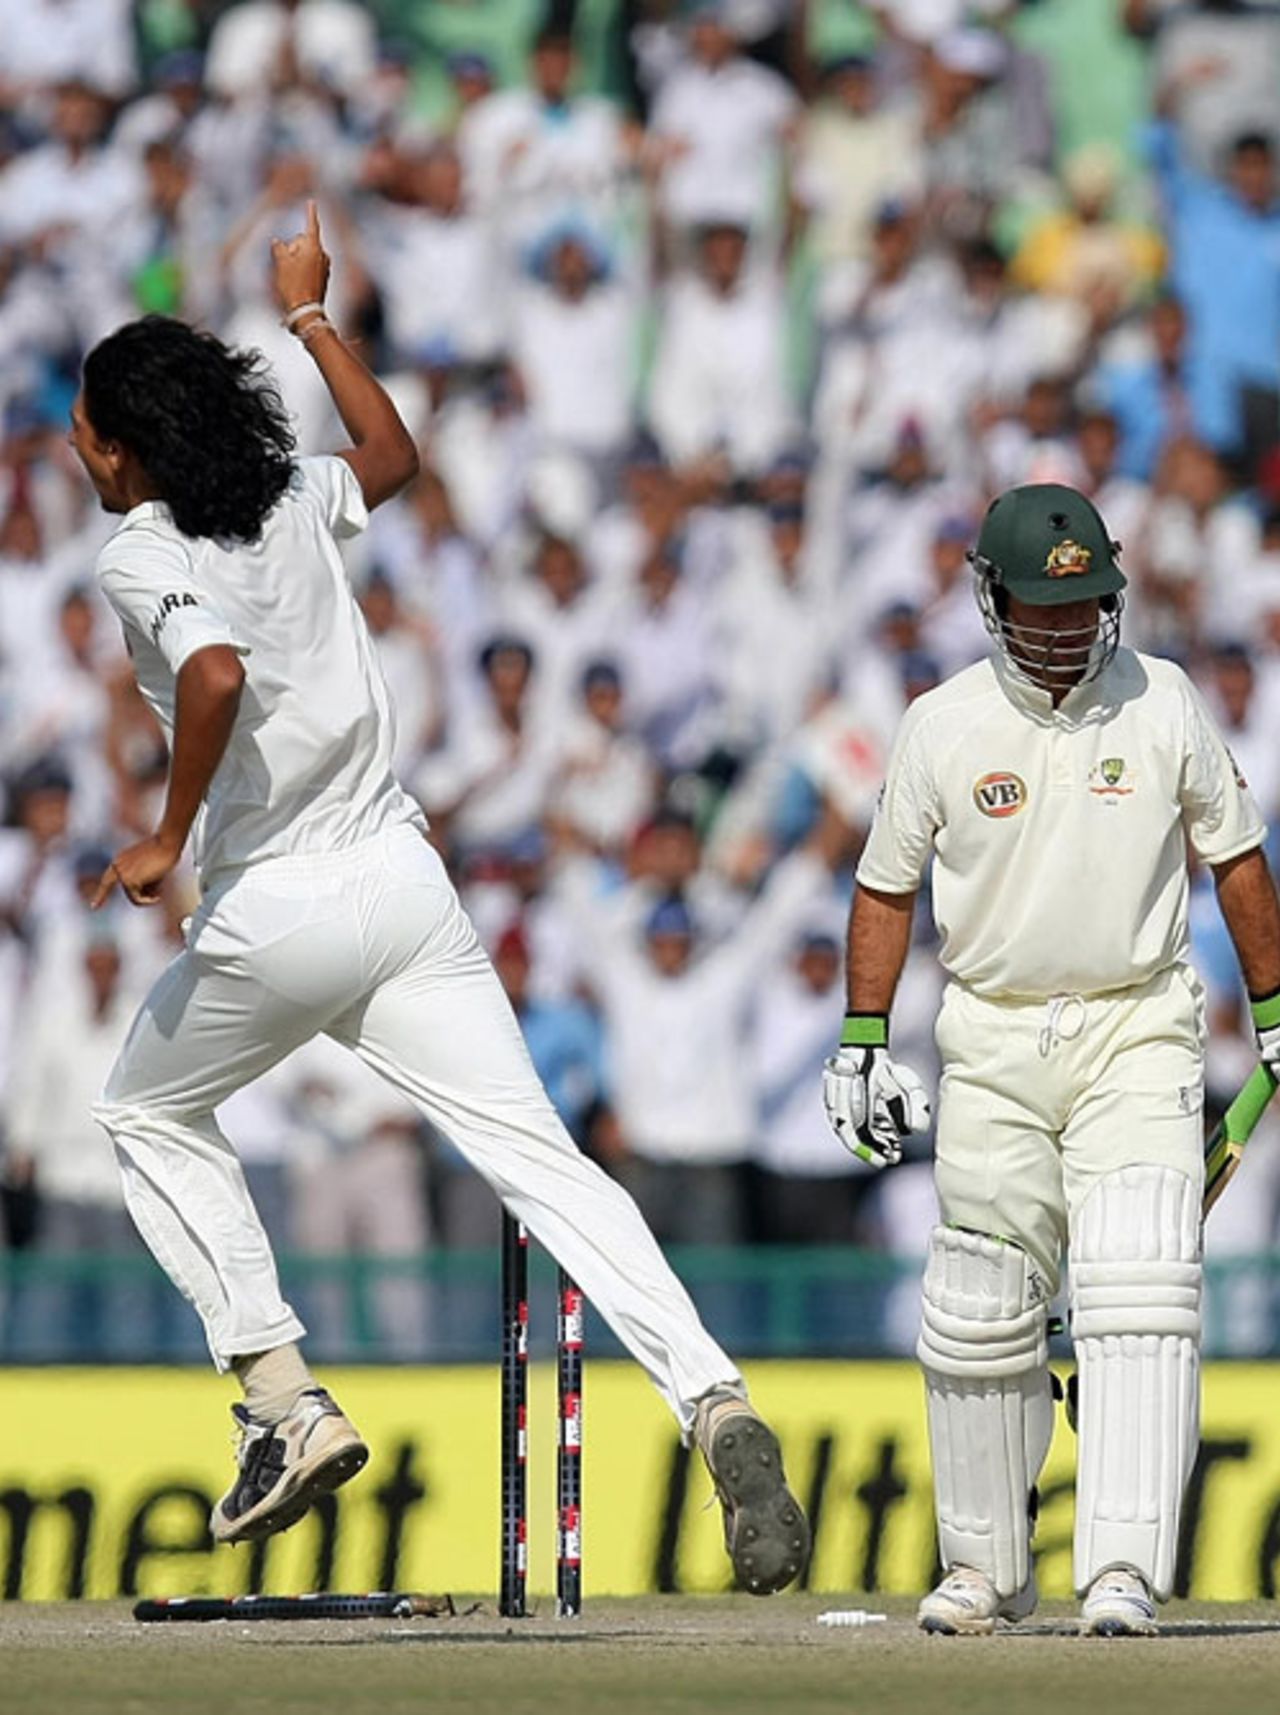 Ricky Ponting loses his off stump to Ishant Sharma, India v Australia, 2nd Test, Mohali, 4th day, October 20, 2008